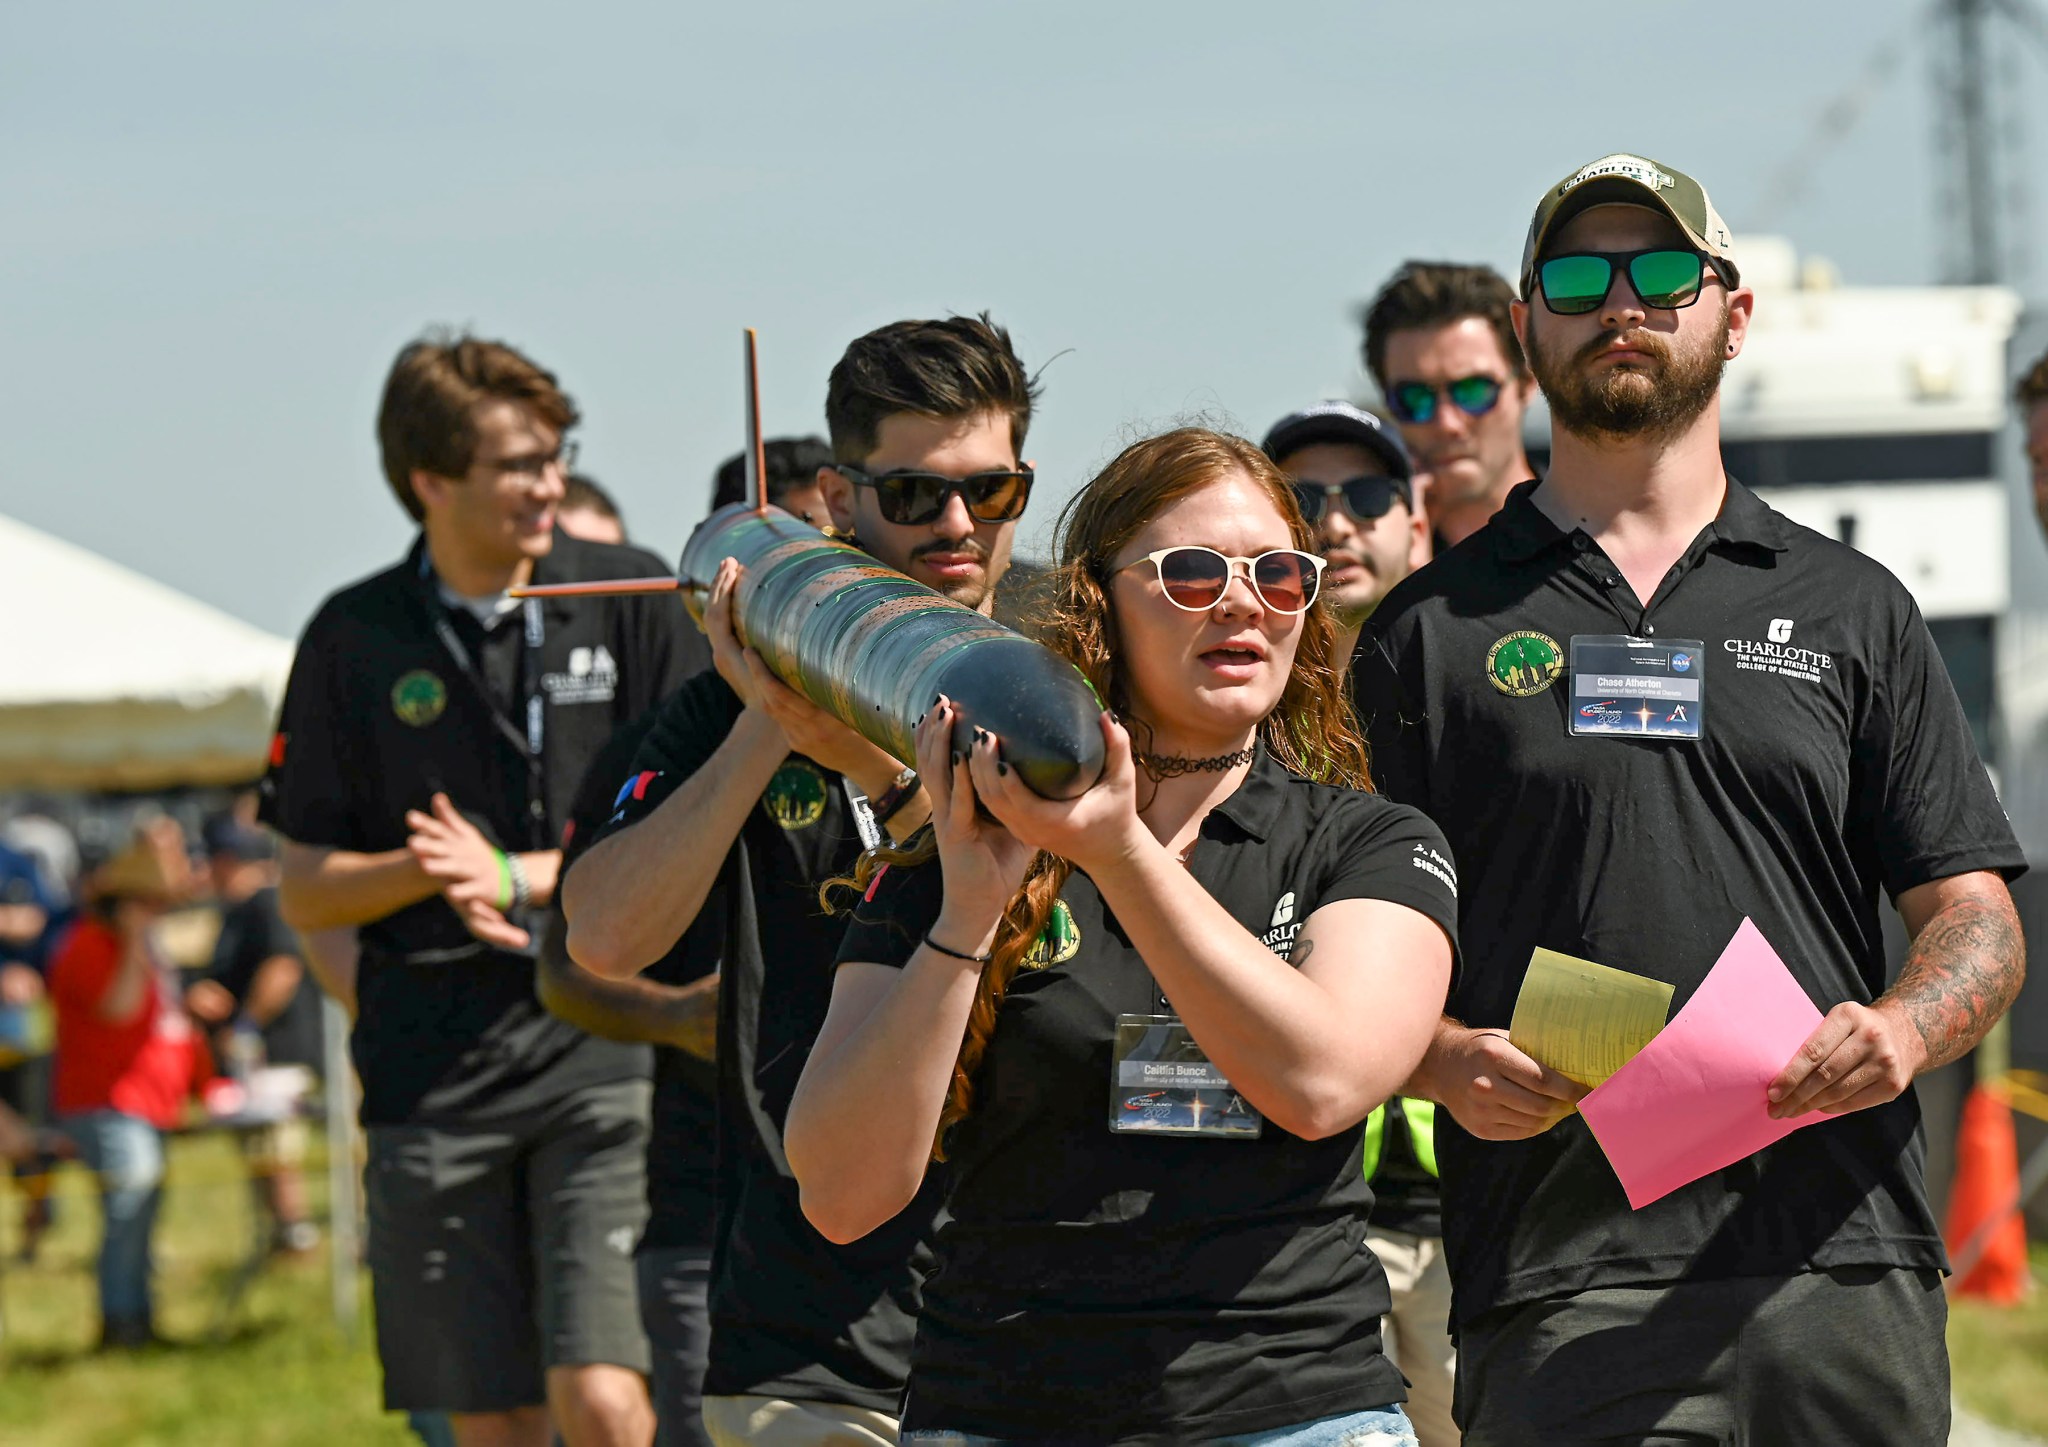 Team members from the University of North Carolina at Charlotte carry their rocket to the launch area near NASA’s Marshall Space Flight Center in Huntsville, Alabama, on April 23. The team won first place in the Launch Division.